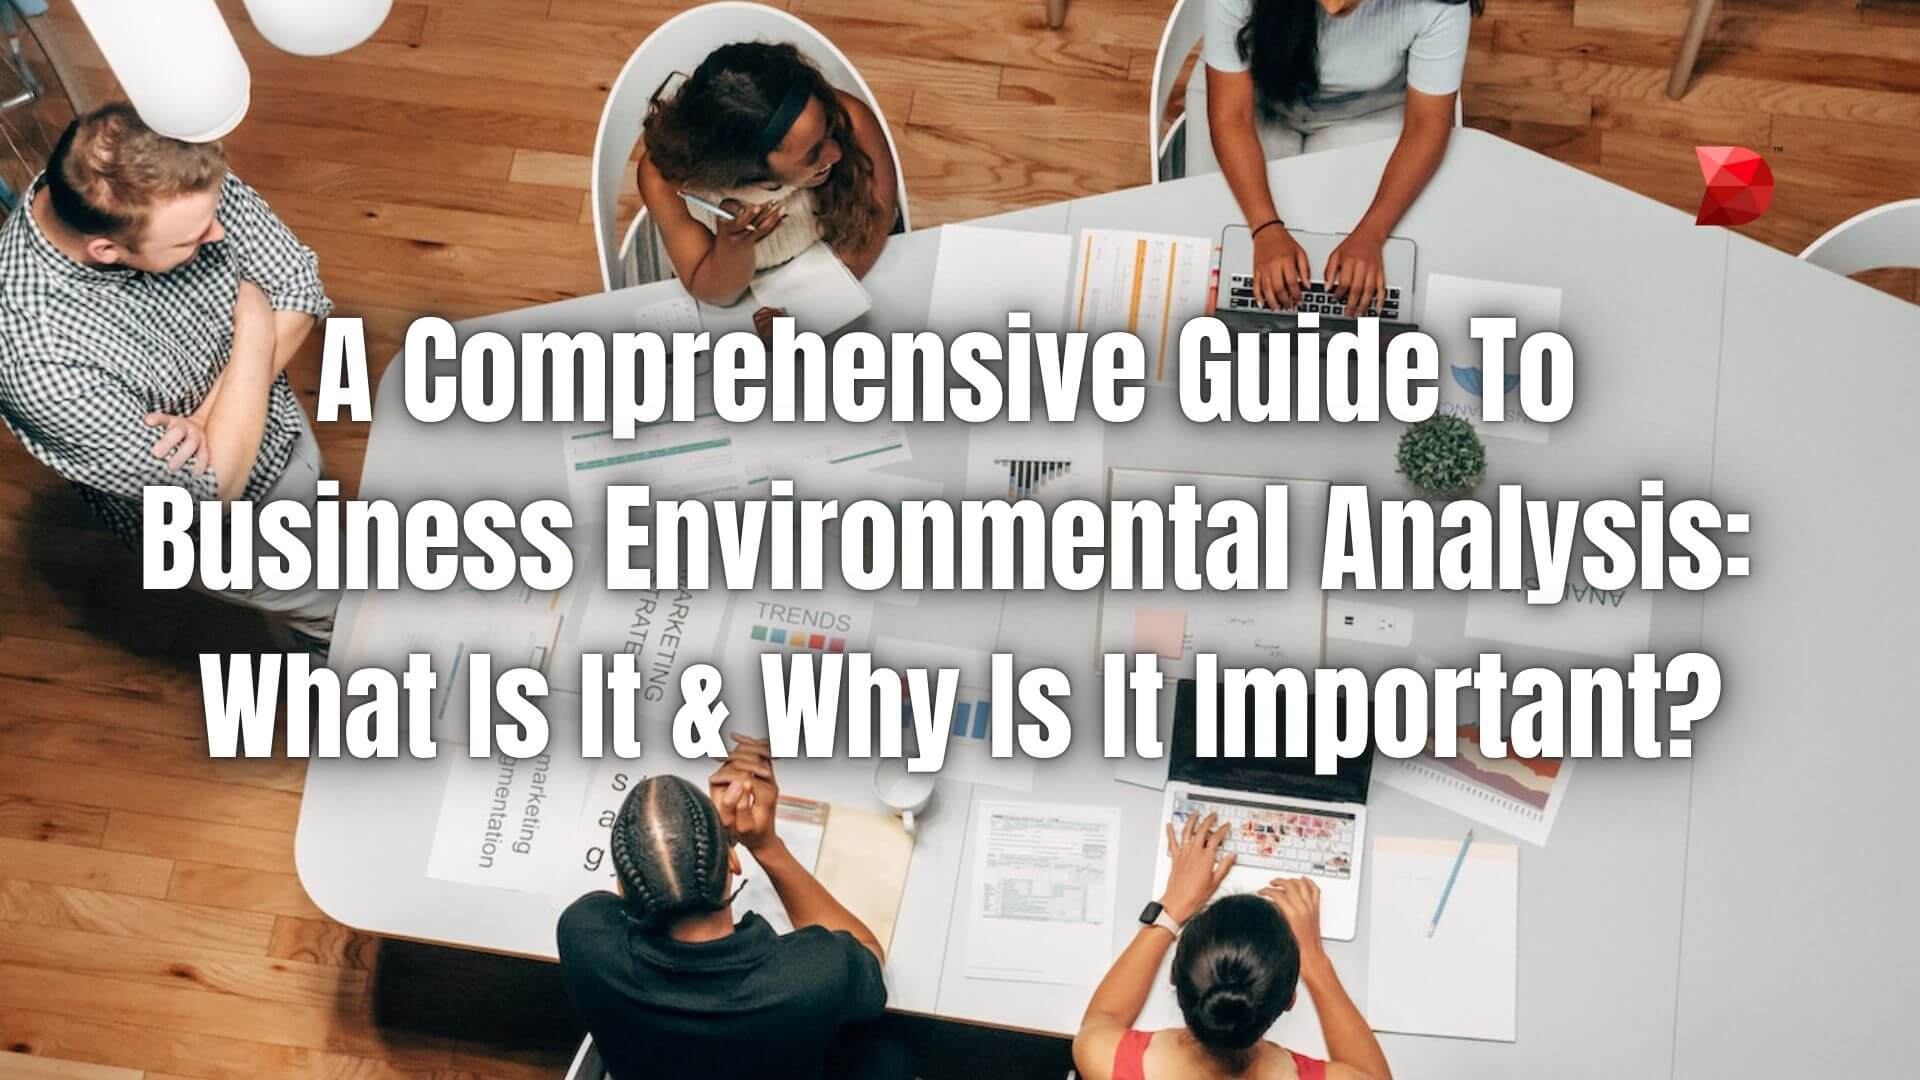 A Comprehensive Guide To Business Environmental Analysis What Is It & Why Is It Important